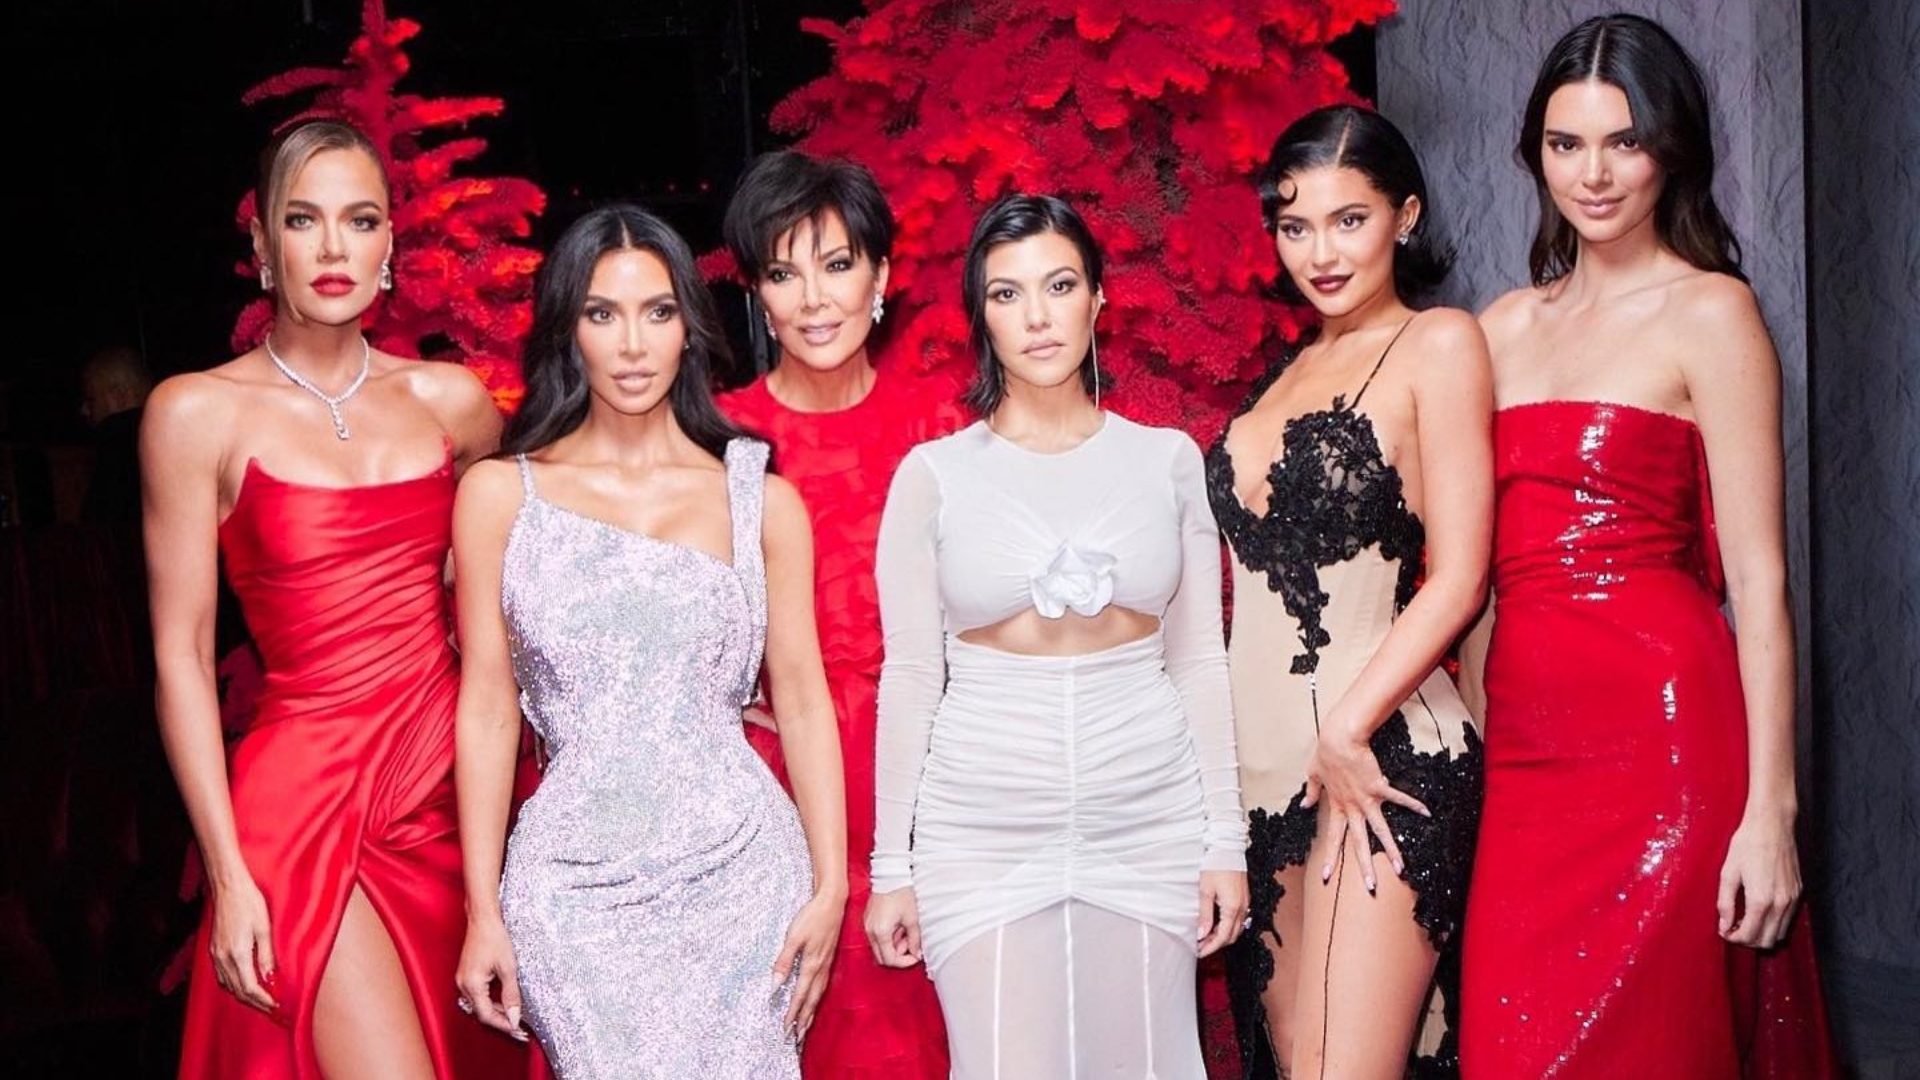 The Kardashians-Jenner sisters with their mother Kris Jenner